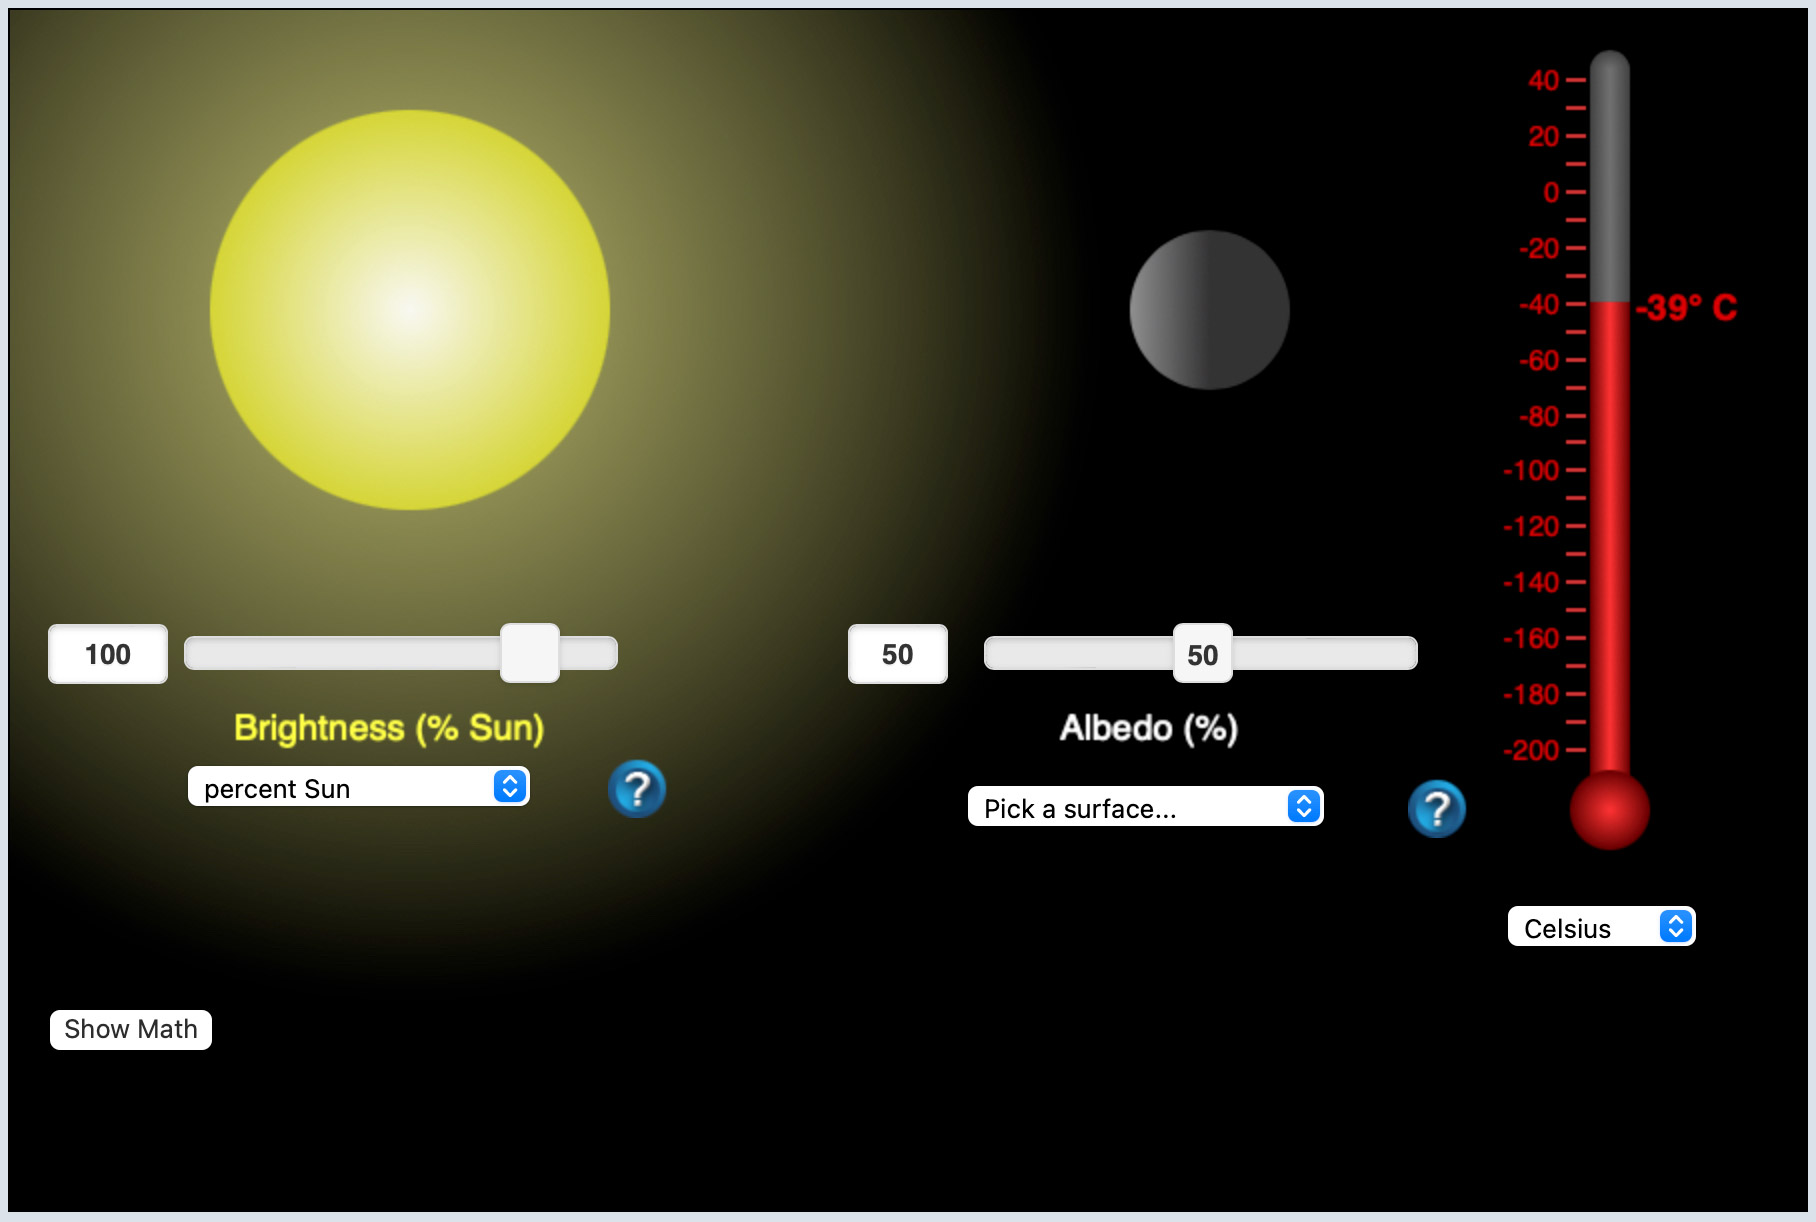 A yellow glowing circle, representing the Sun, is on the left, and a smaller gray circle representing Earth is on the right. Below the Sun there are white sliding bars that allow the user to adjust the Brightness of the Sun, written in yellow. And below the Earth a sliding bar to adjust the Albedo, written in white. Below the scales are